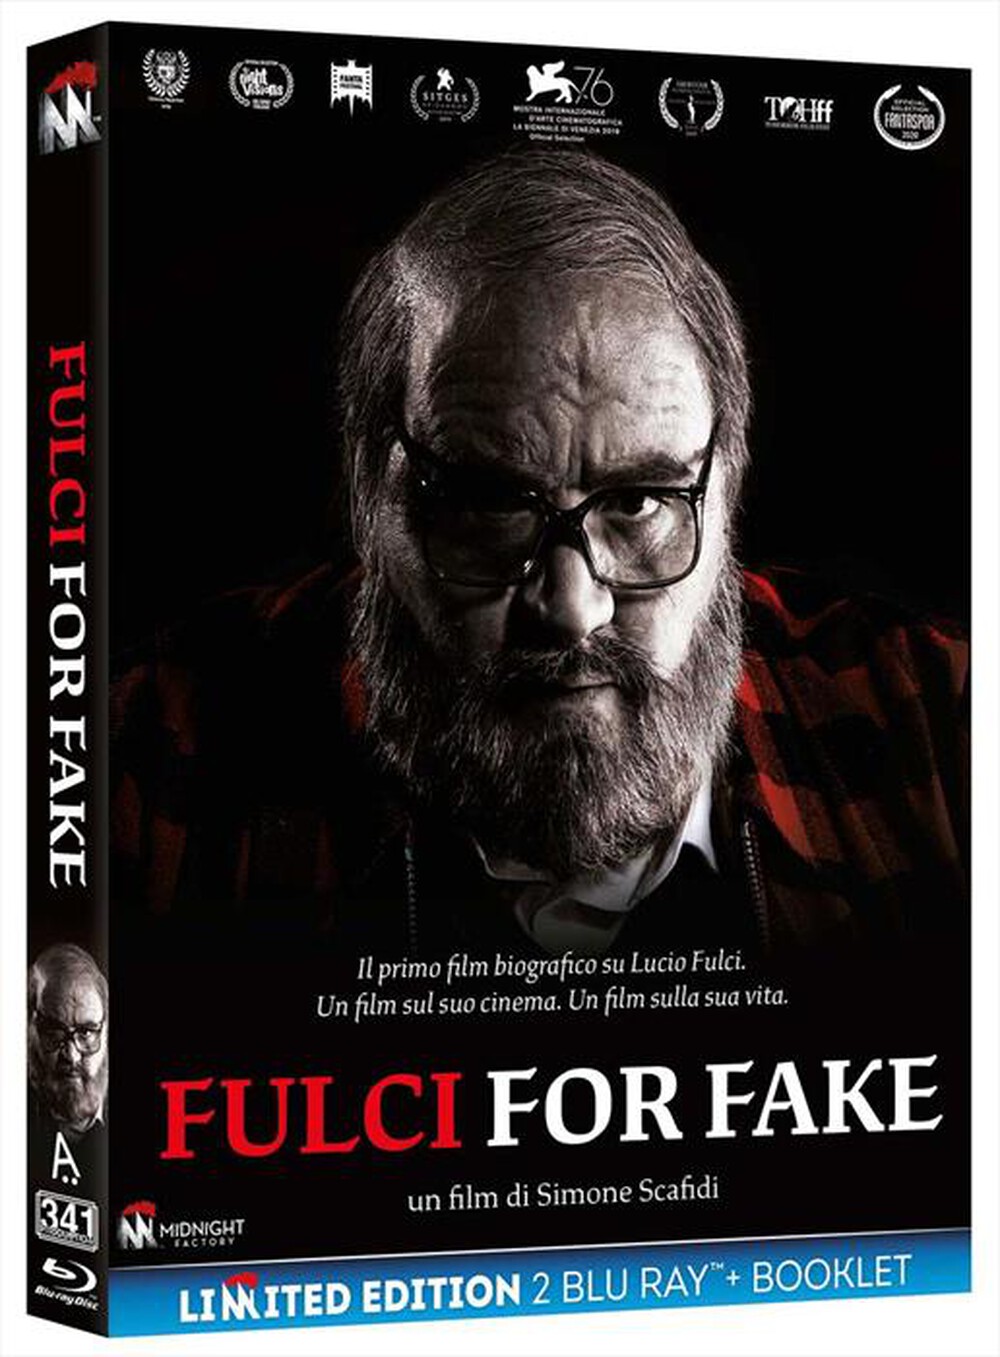 "Midnight Factory - Fulci For Fake (2 Blu-Ray+Booklet)"